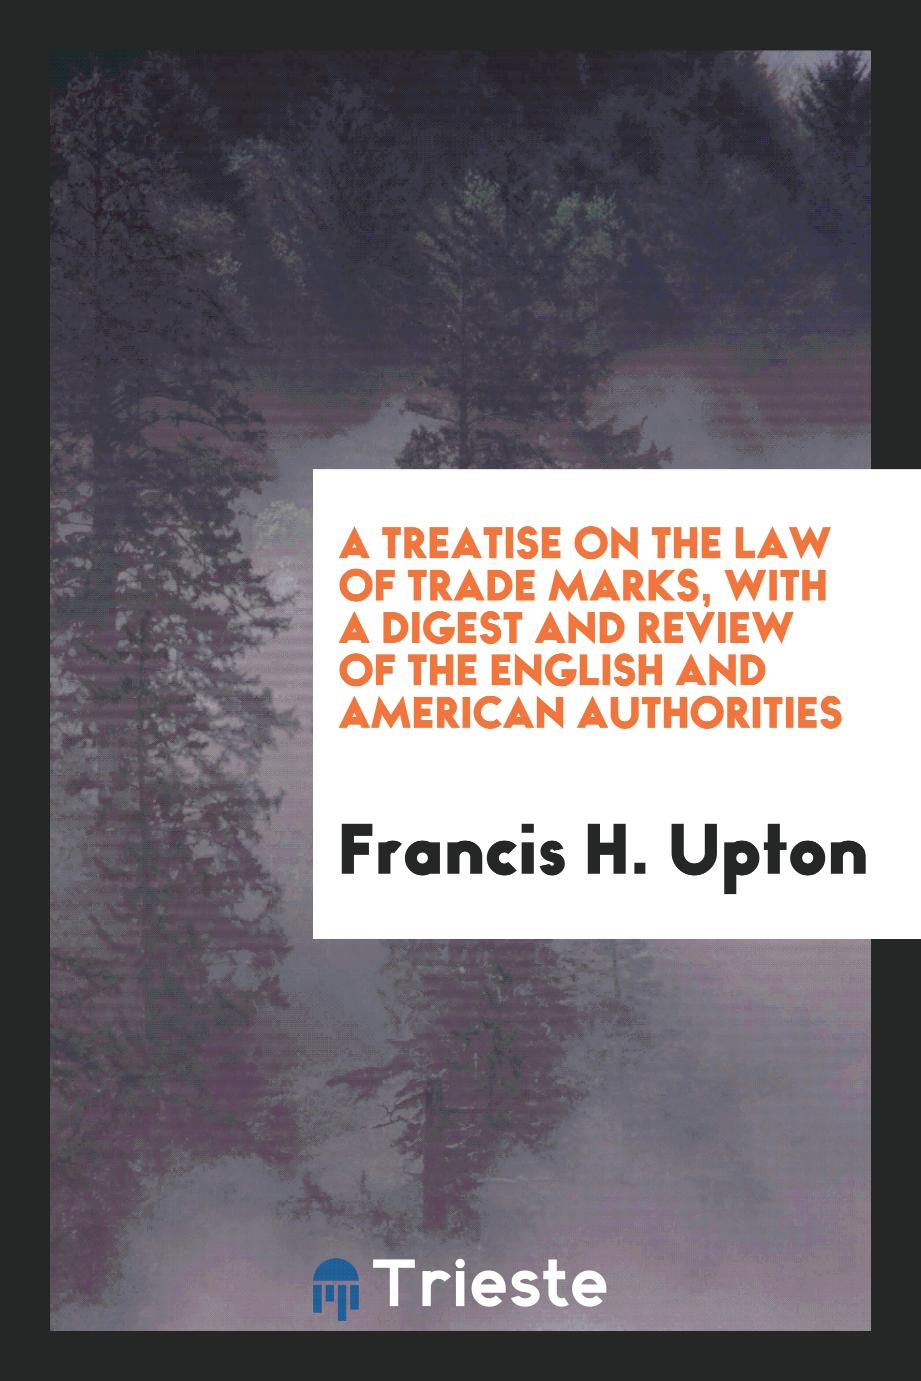 A treatise on the law of trade marks, with a digest and review of the English and American authorities